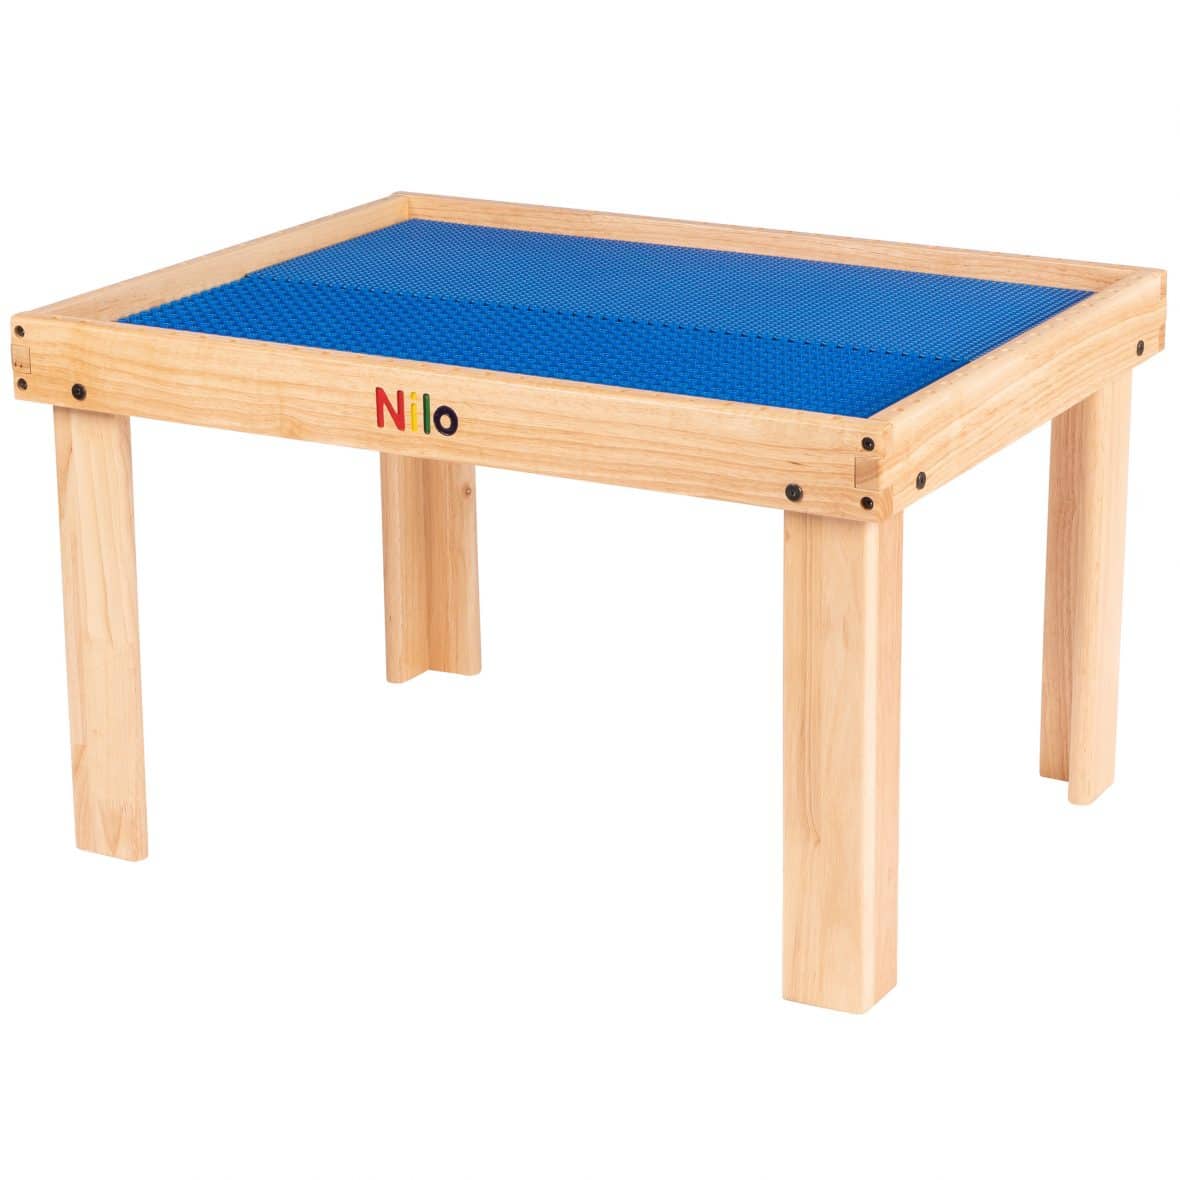 small table for kids playing, lego table for kids, duplo table, small lego tables, wooden train table